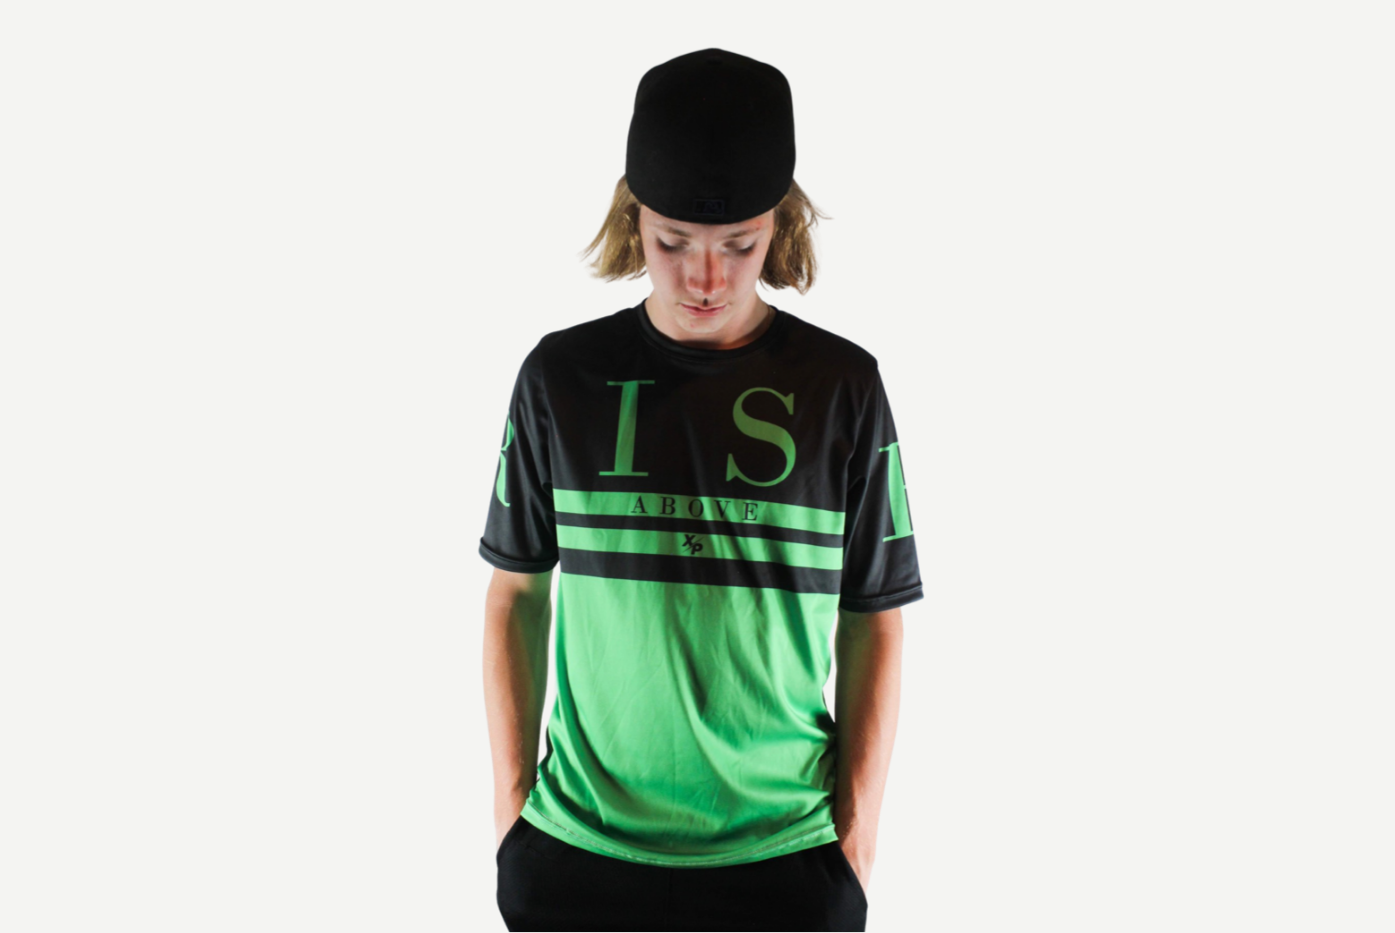 Rise Above Fully Sublimated Short Sleeve T-Shirt in Luminescent Green Xtreme Pro Apparel